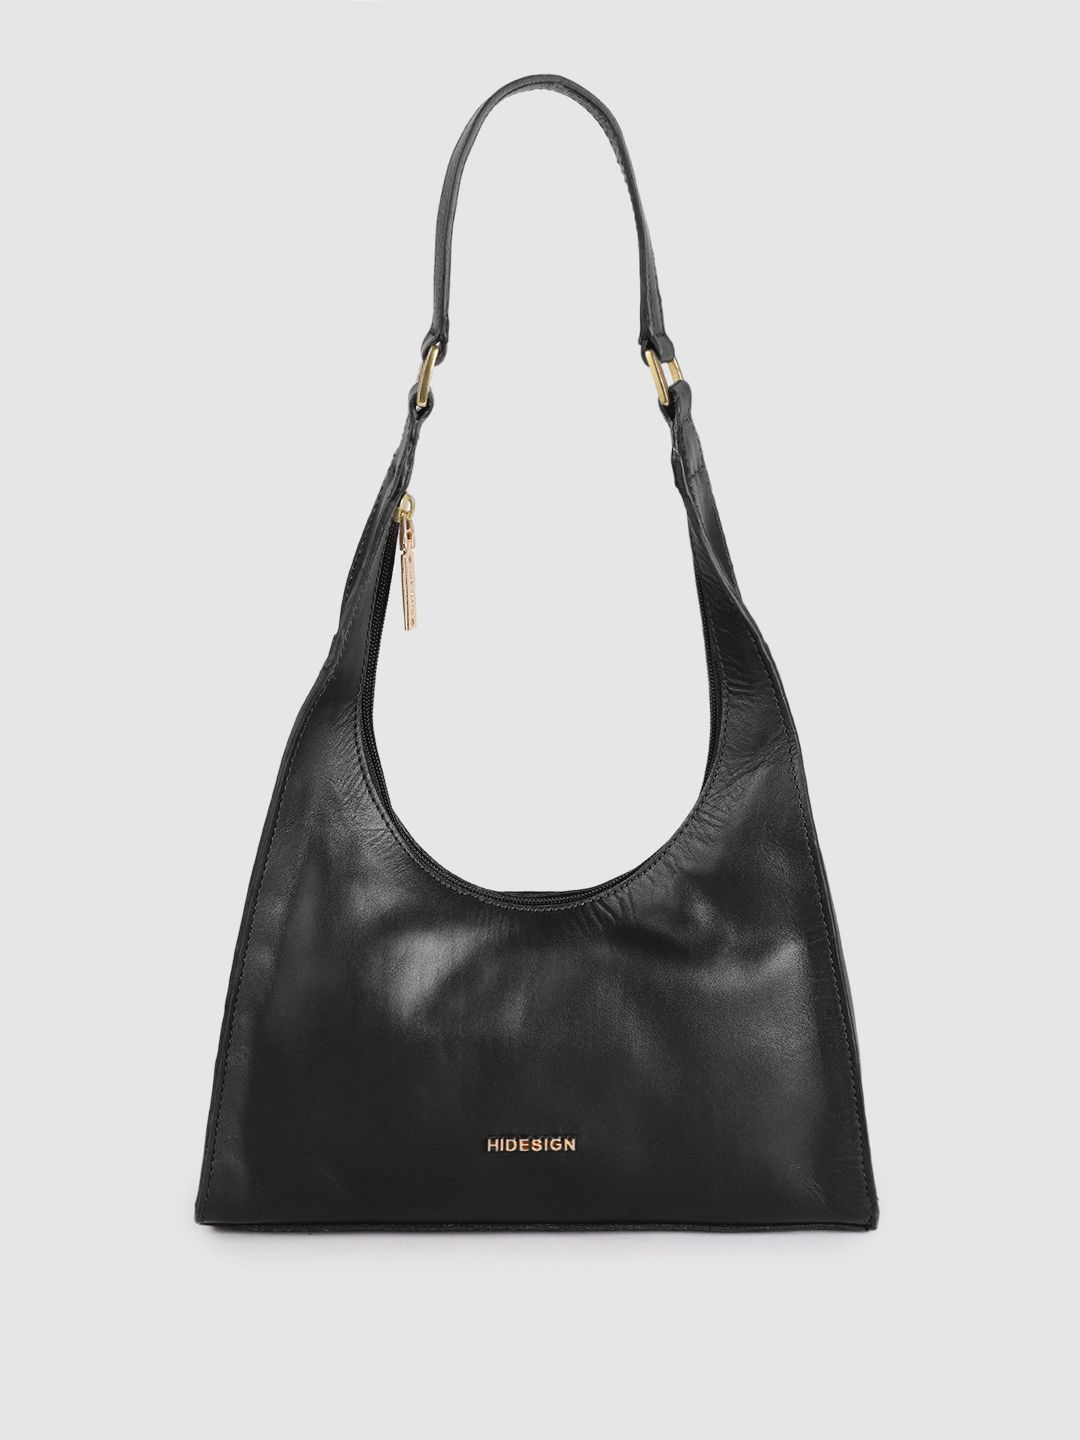 Hidesign Black Leather Structured Hobo Bag Price in India